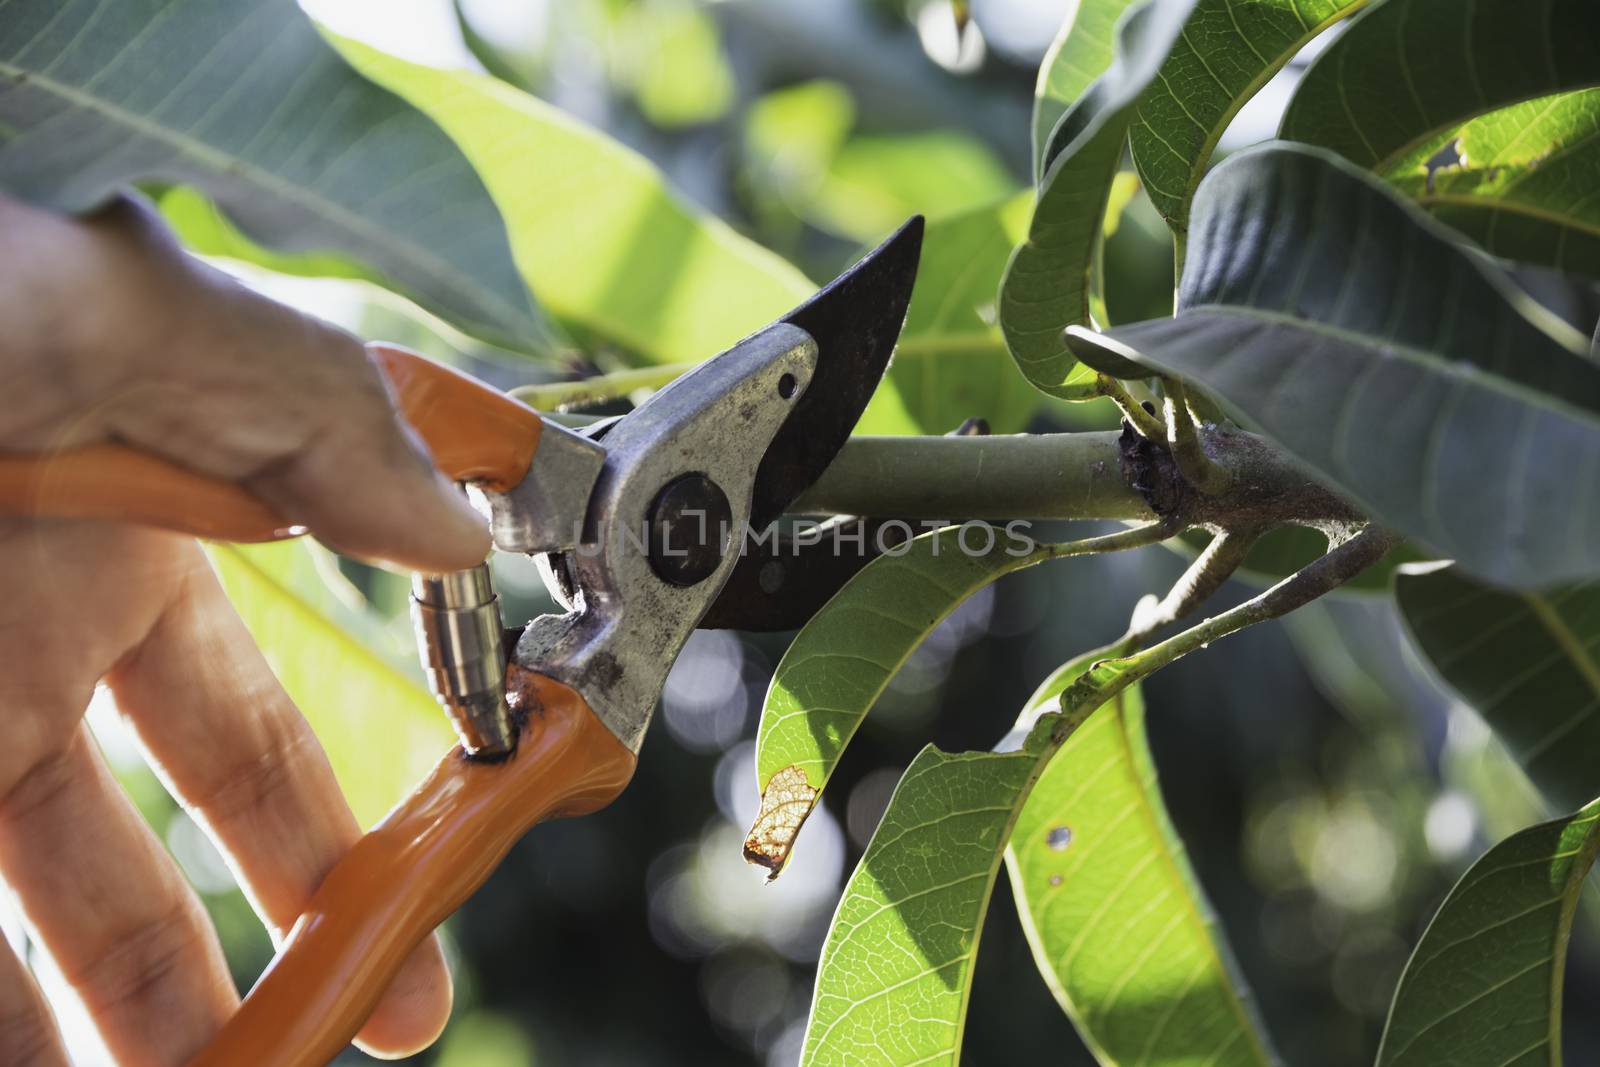 Hand of Gardener pruning trees with pruning shears.